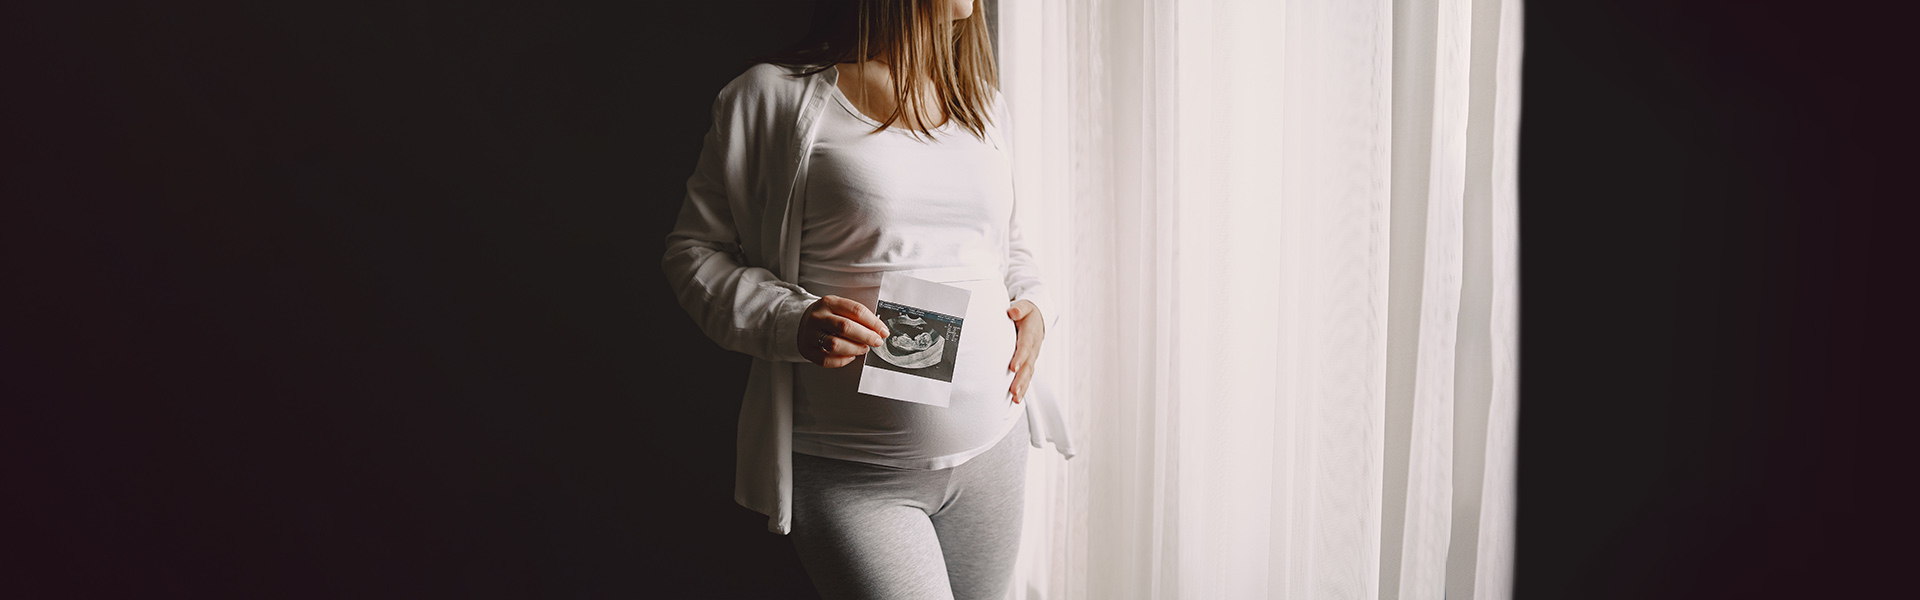 Are Dental X-Rays Safe During Pregnancy?